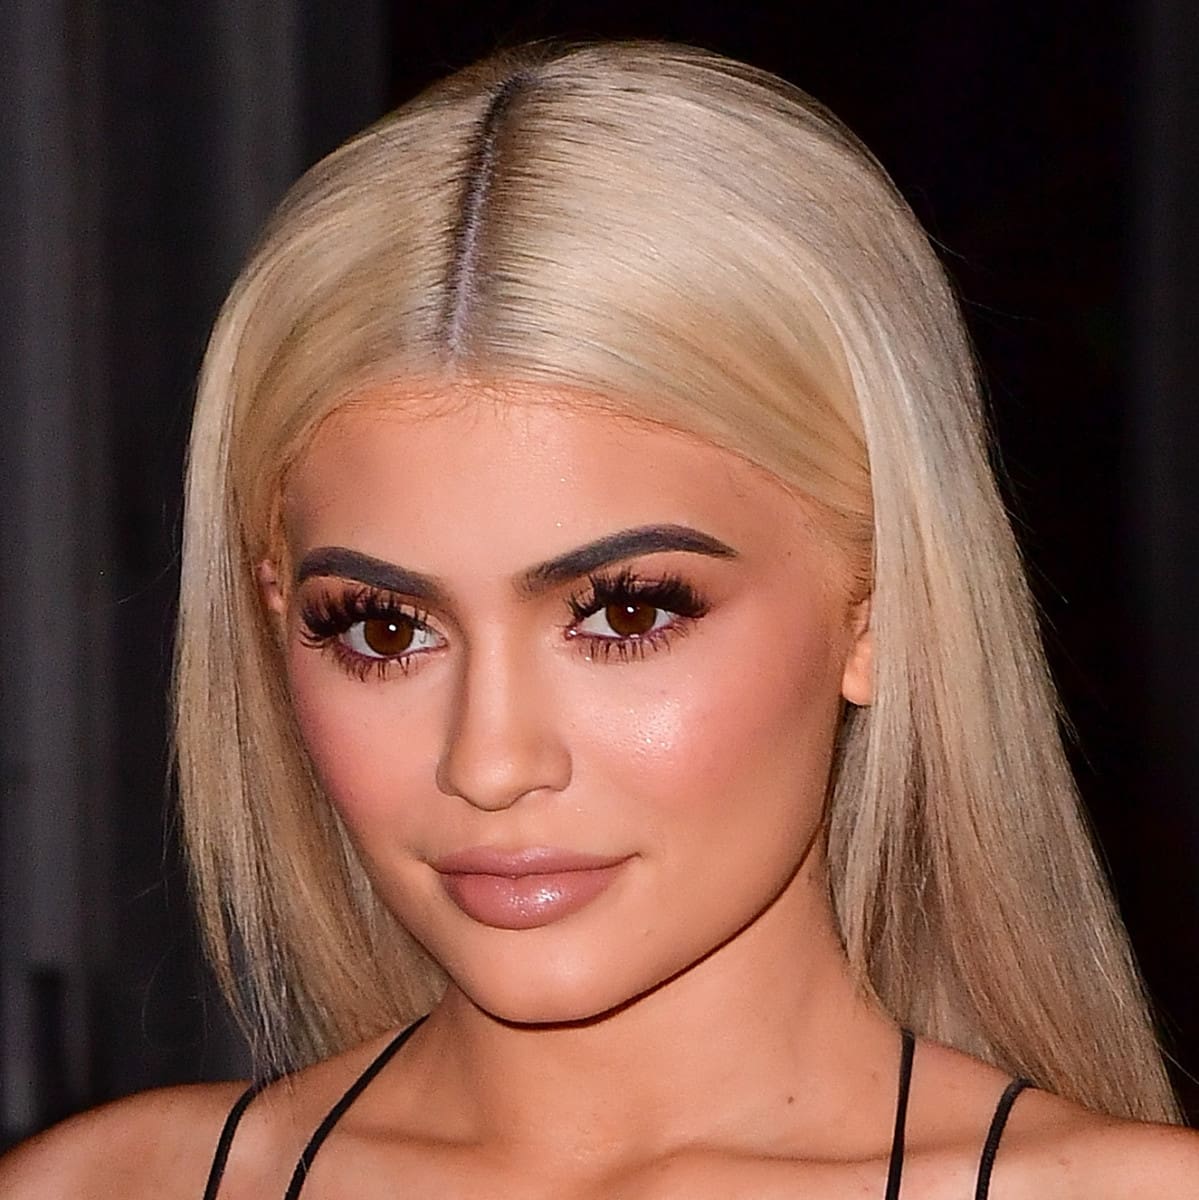 blac-chynas-fans-are-freaking-out-following-kylie-jenner-killing-allegations